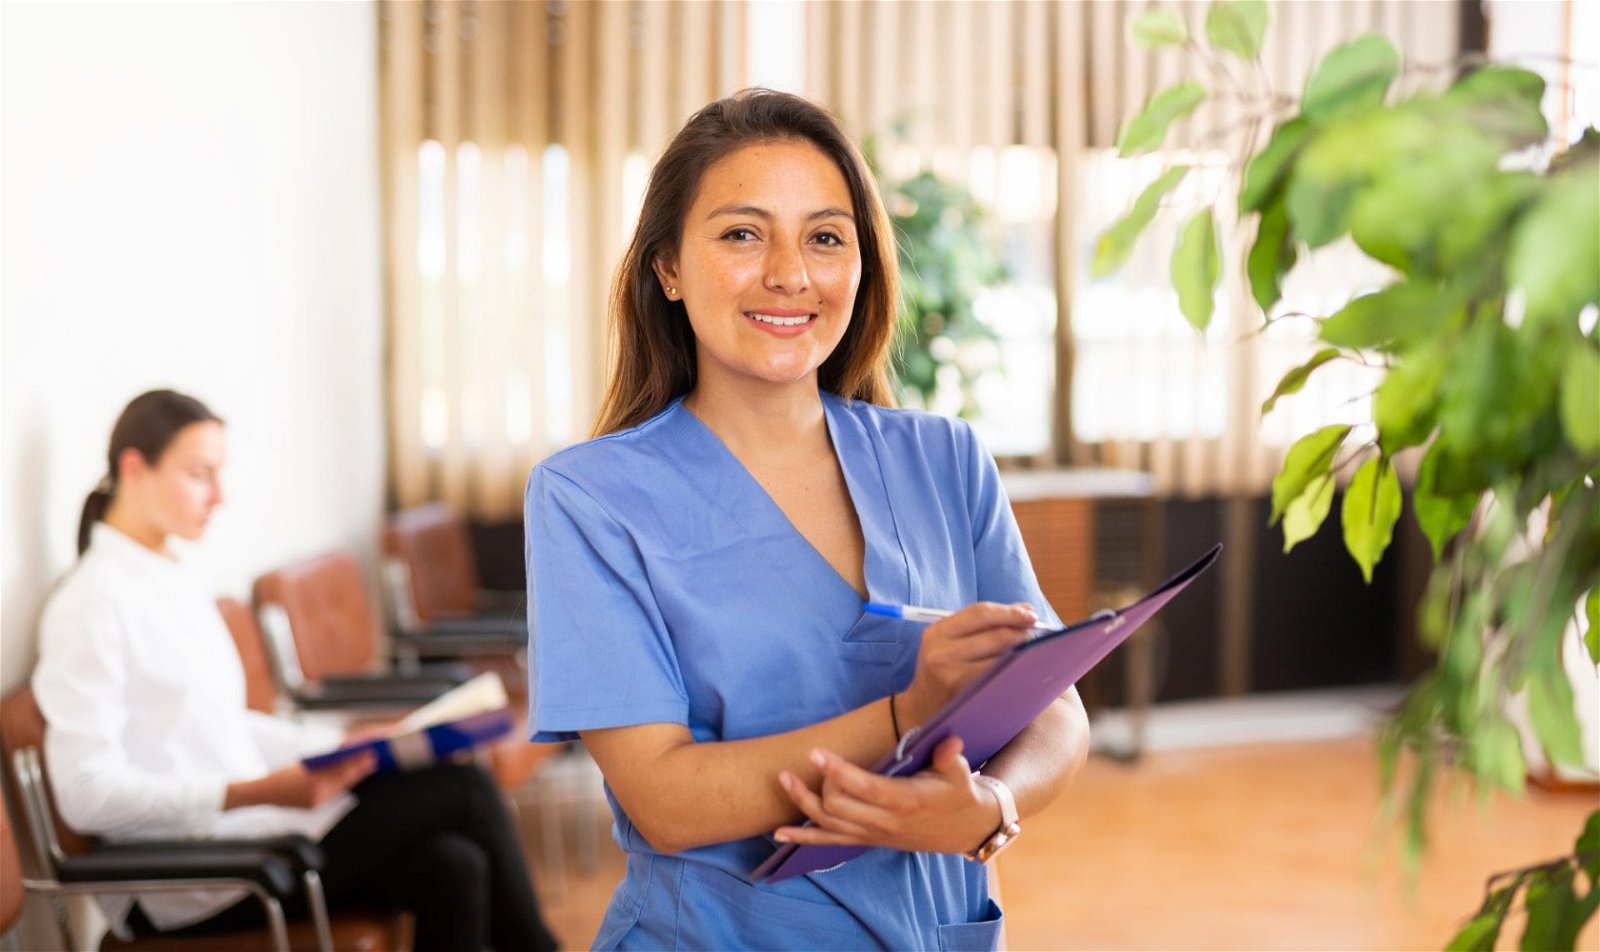 Is Administrative Medical Assistant Career Training Right for You?